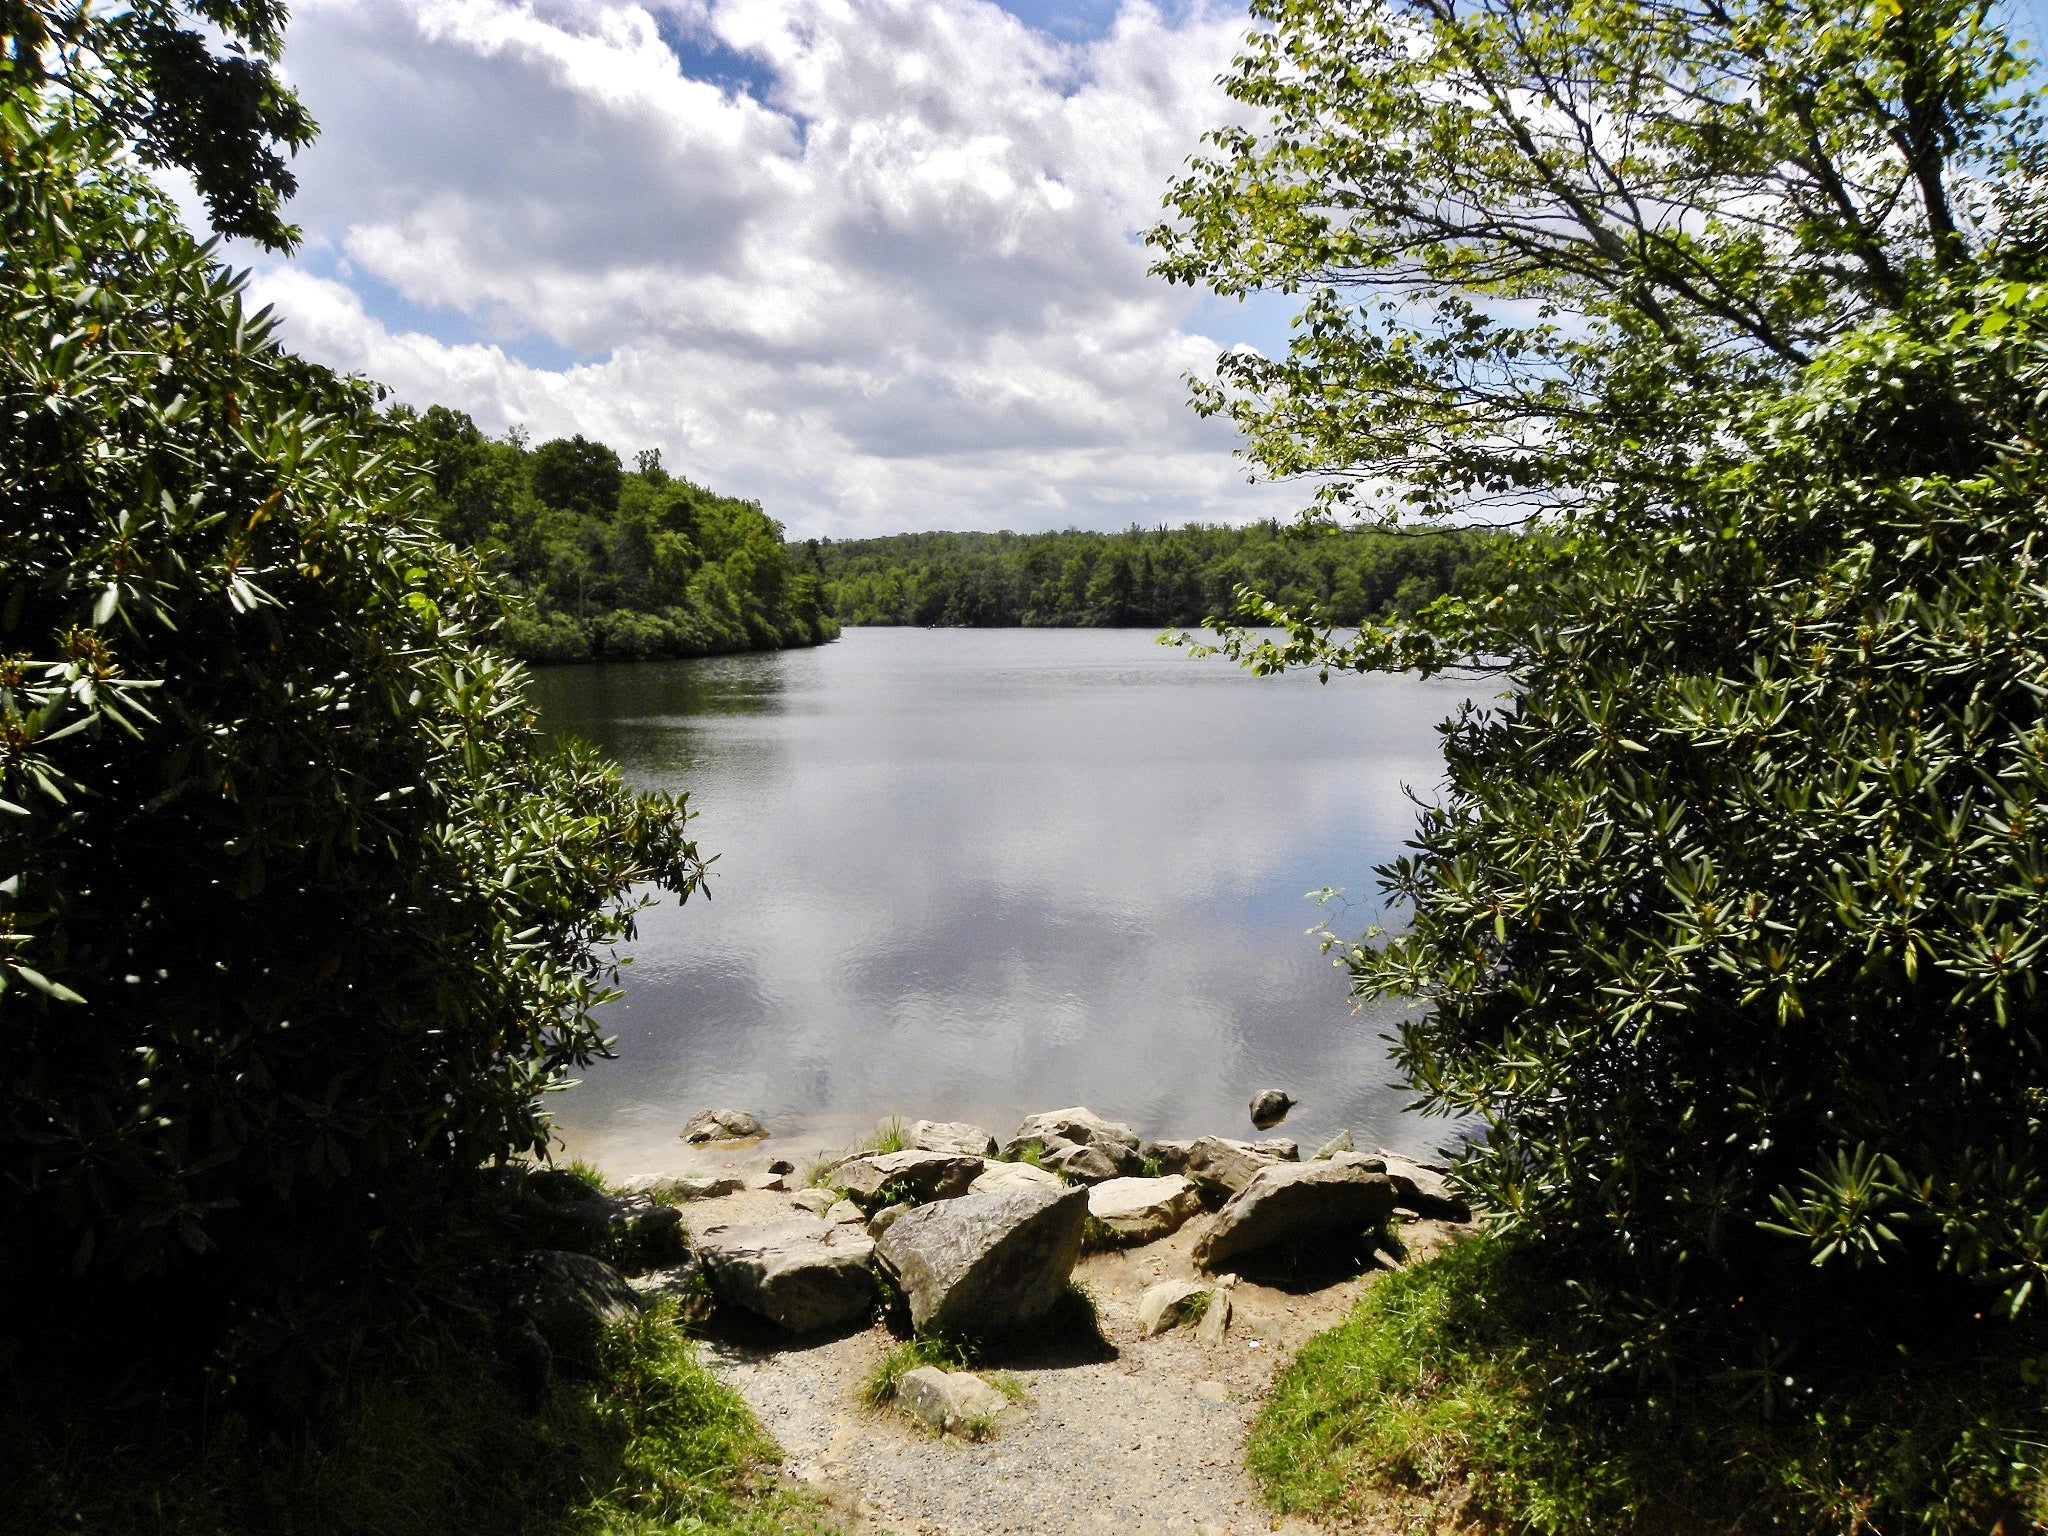 A View of the Lake from the Park